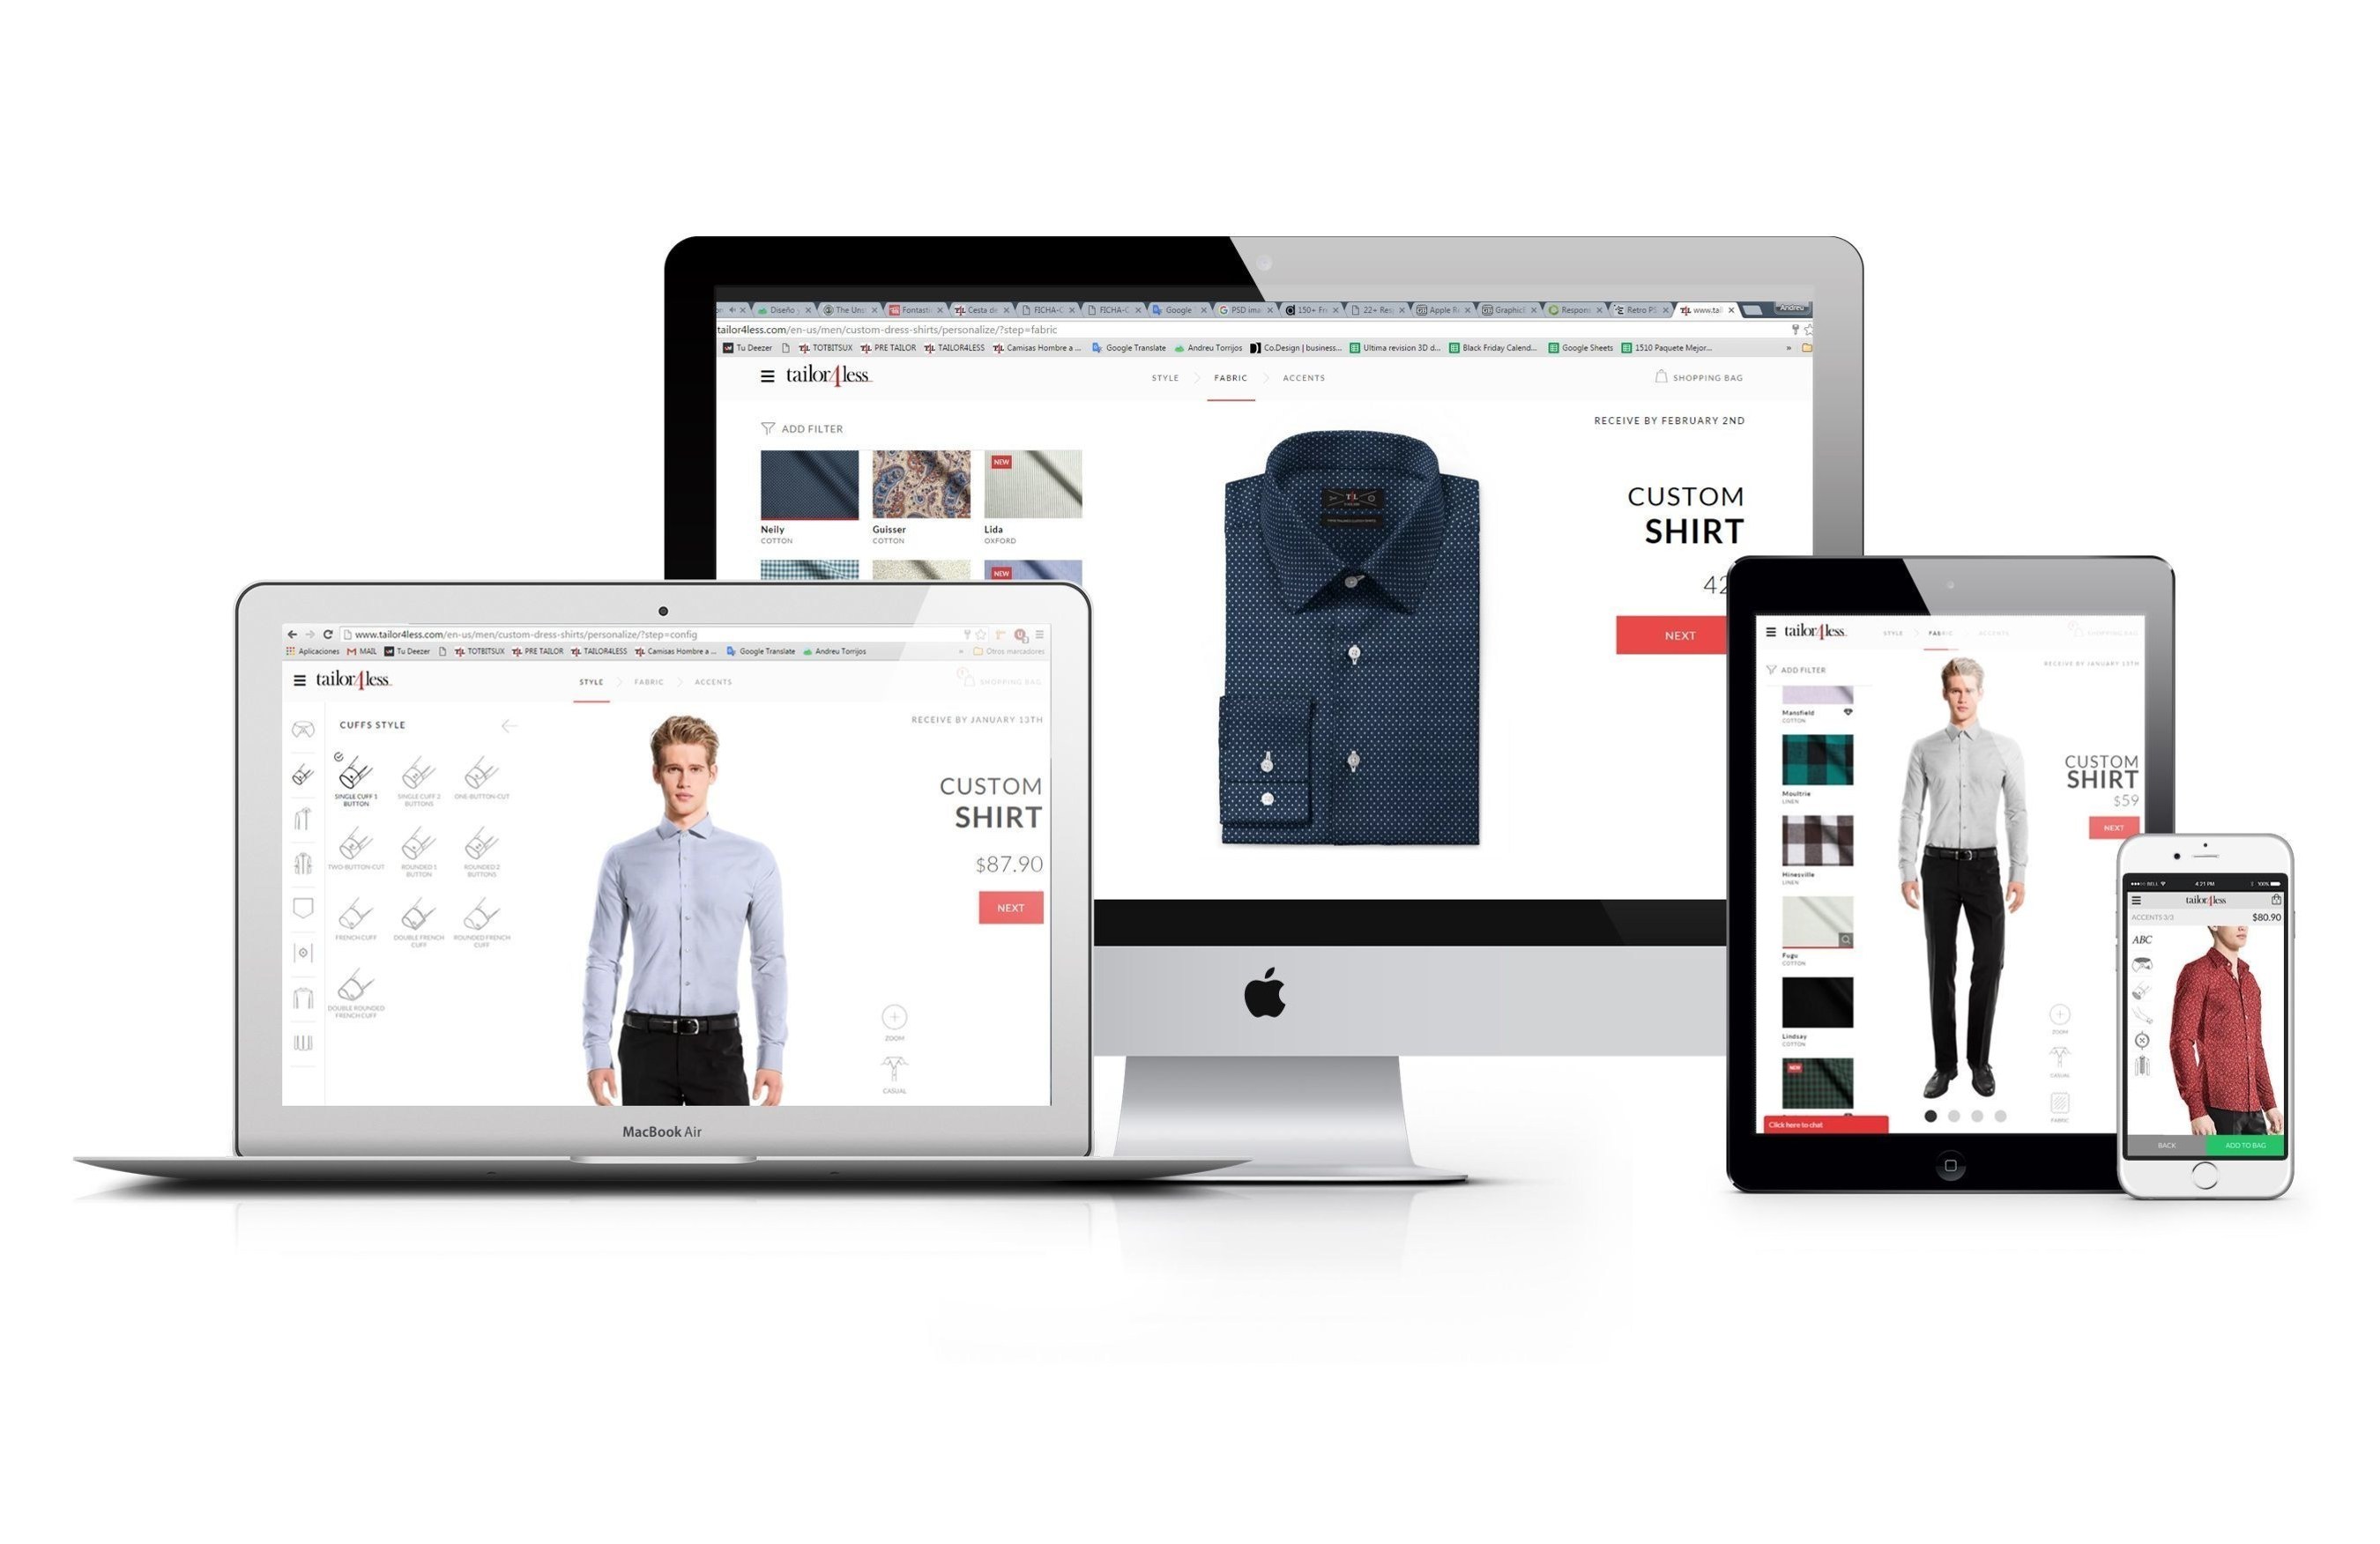 Founded in 2008, Tailor4less is the e-commerce leader in custom suits and shirts. As a customer, you can choose up to 1'000 different customization options and see the design changes on real time, in different view angles and zoom options (PRNewsFoto/Tailor4less) (PRNewsFoto/Tailor4less)